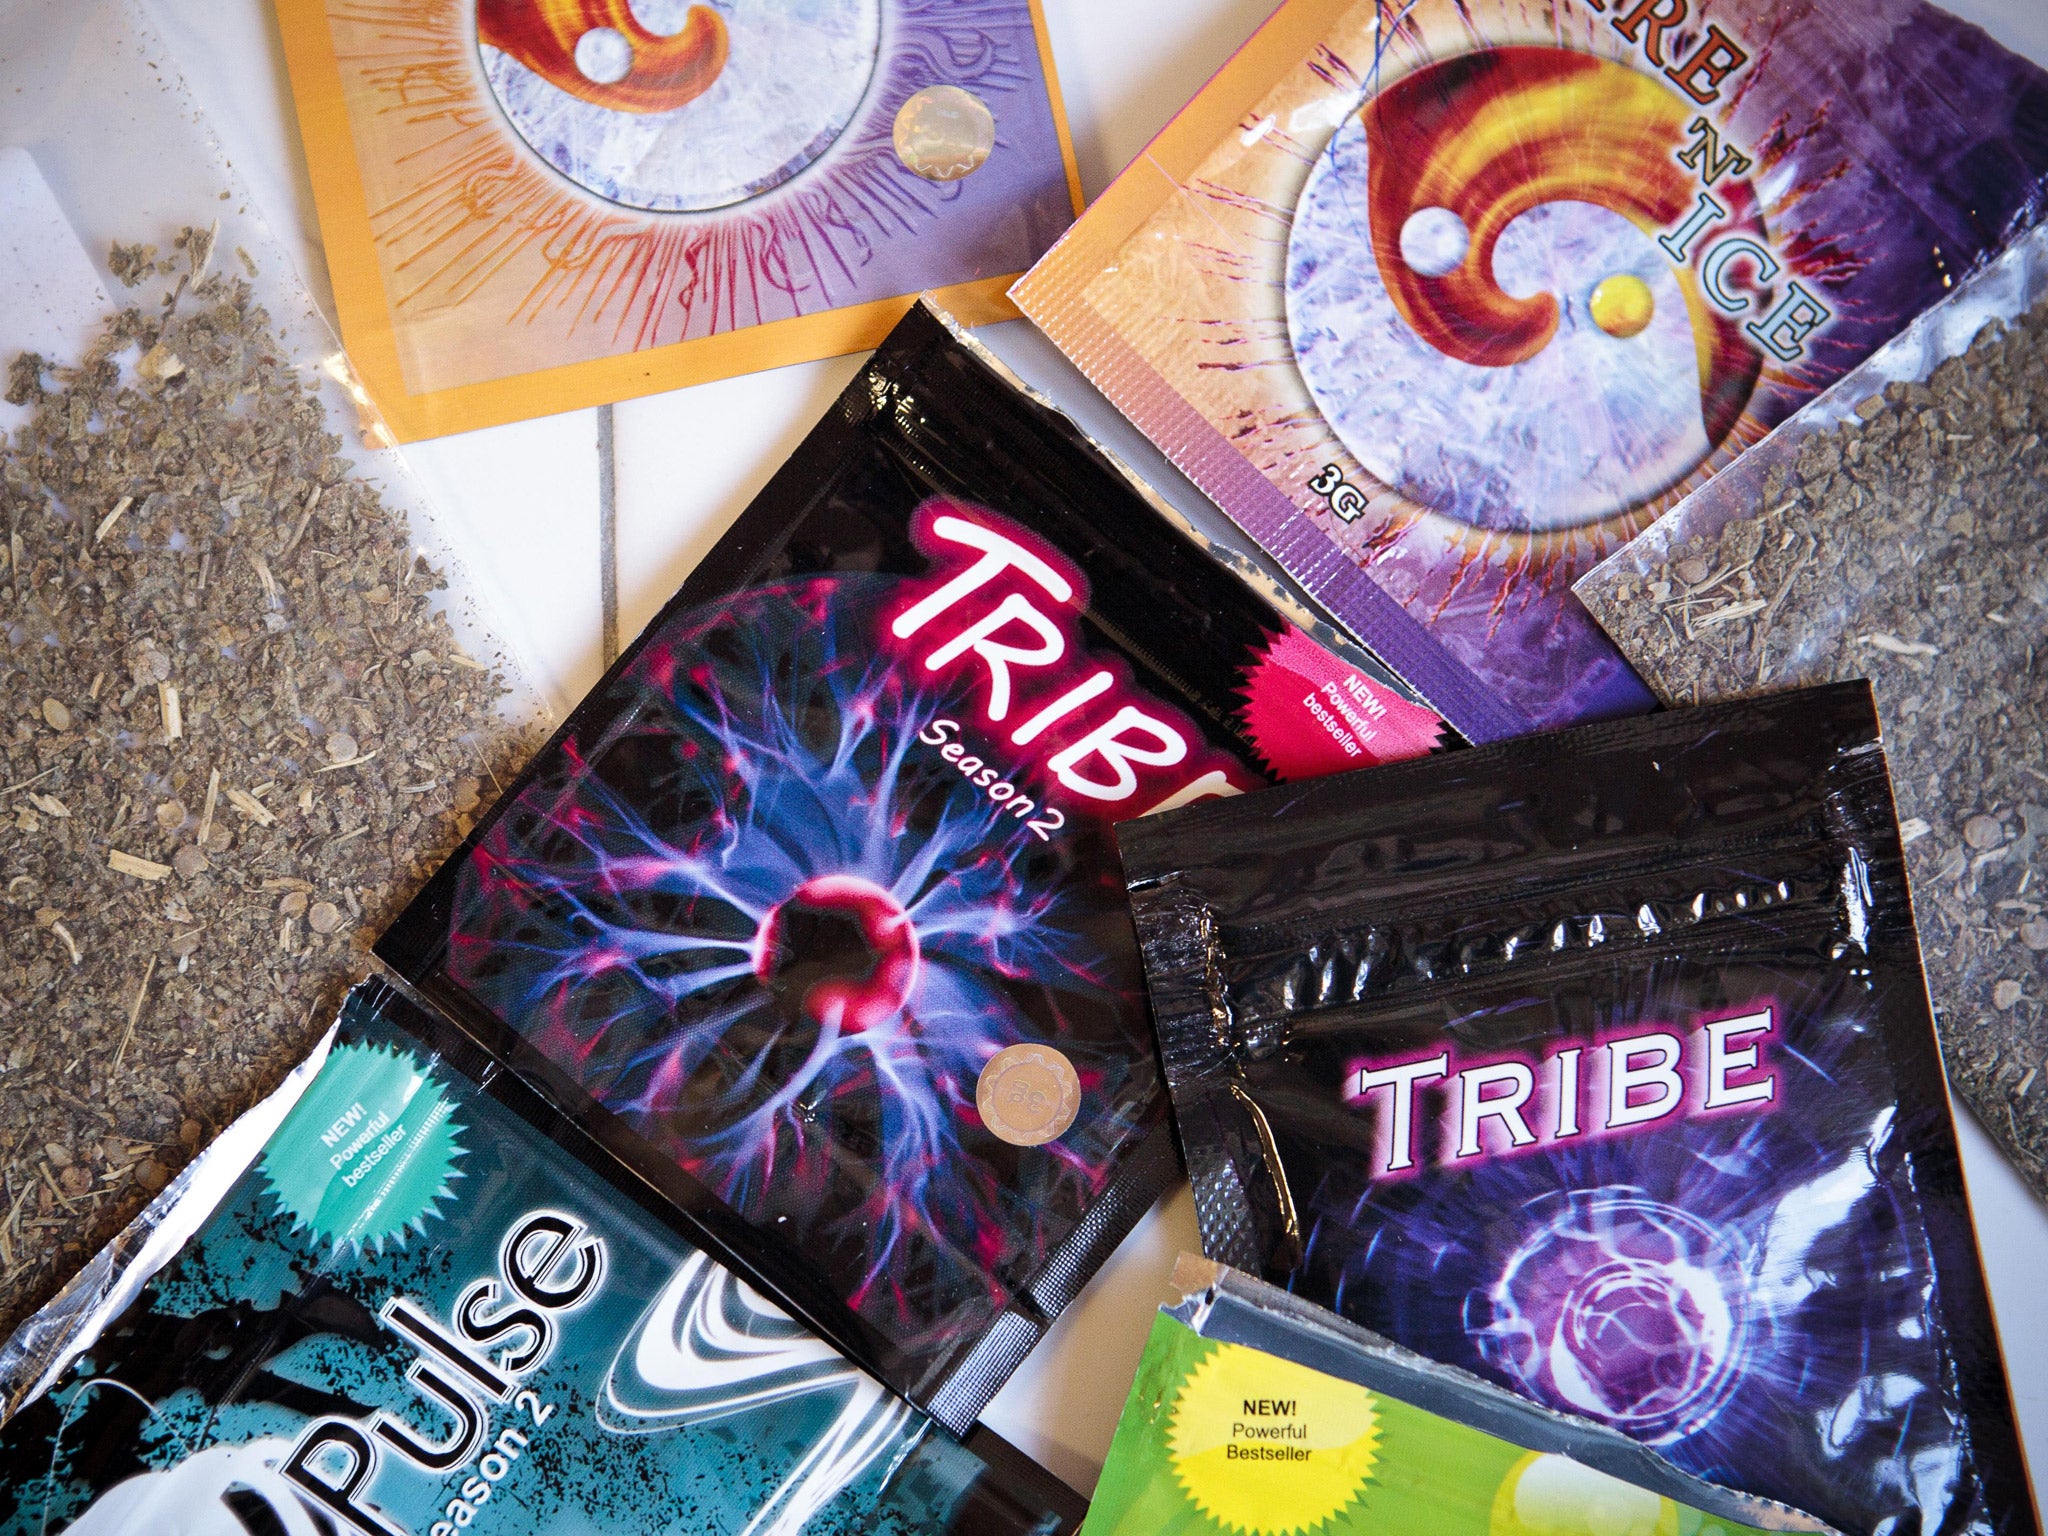 The European Commission have conceded that they would struggle to tackle the sale of legal highs on the internet